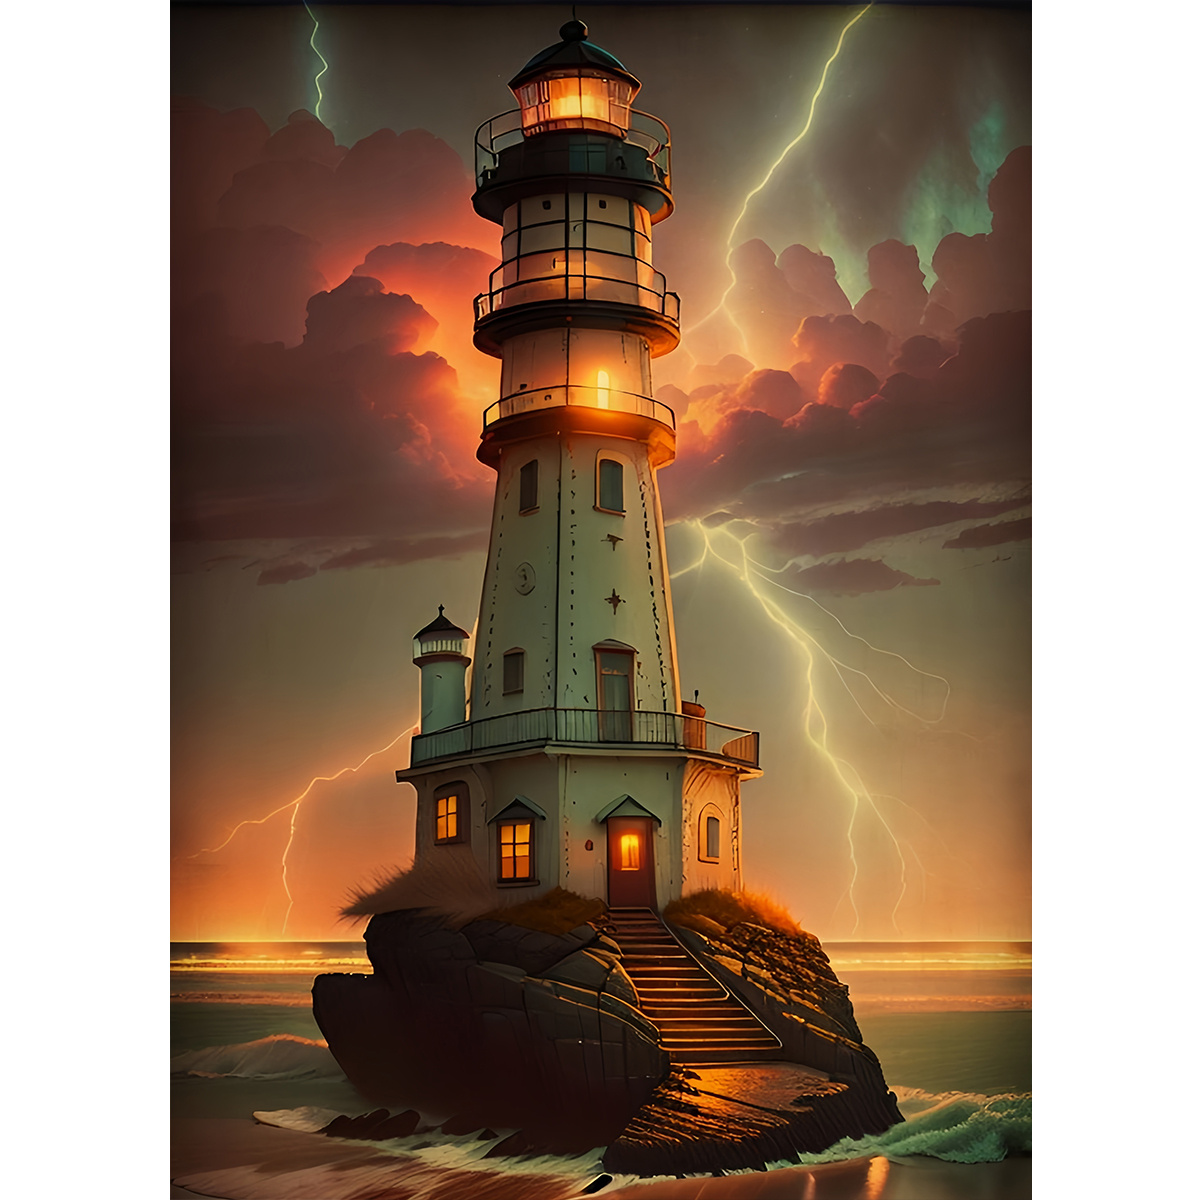 

Lighthouse 5d Diy Diamond Painting Kit - Full Round Drill, Frameless Canvas Art For Home Decor, Perfect Gift For Birthdays & Craft Lovers, 11.8x15.7 Inches